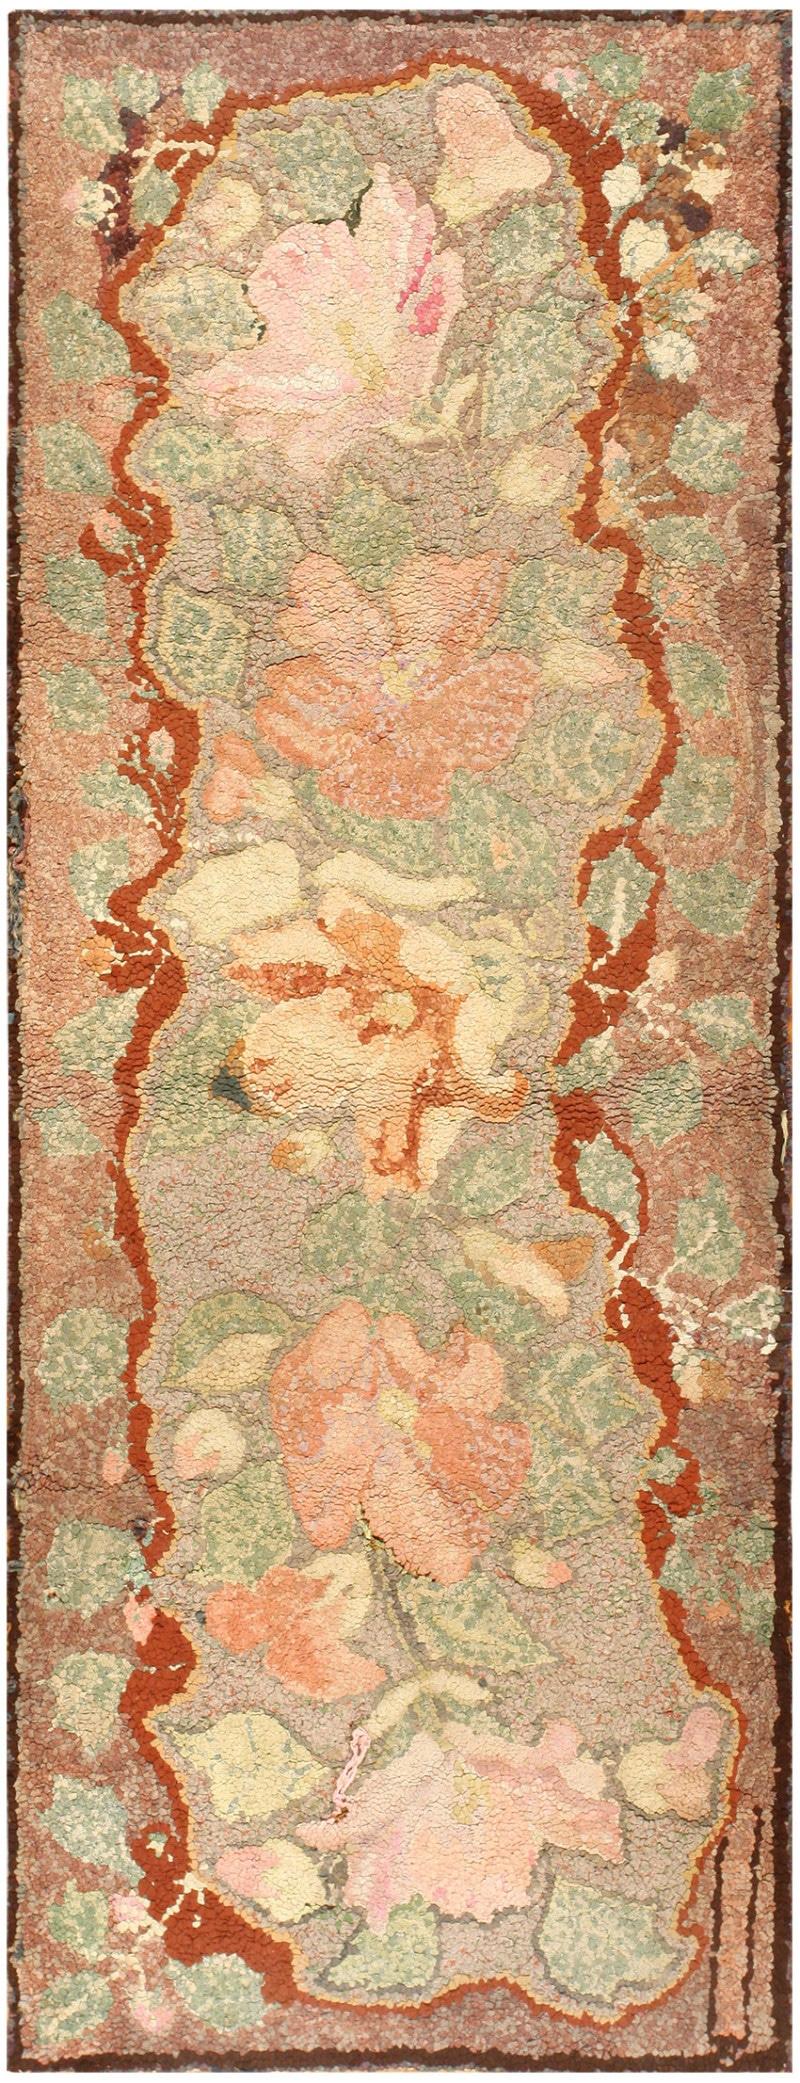 Hand-Knotted Rustic Floral Antique American Short Runner Hooked Rug 3'2